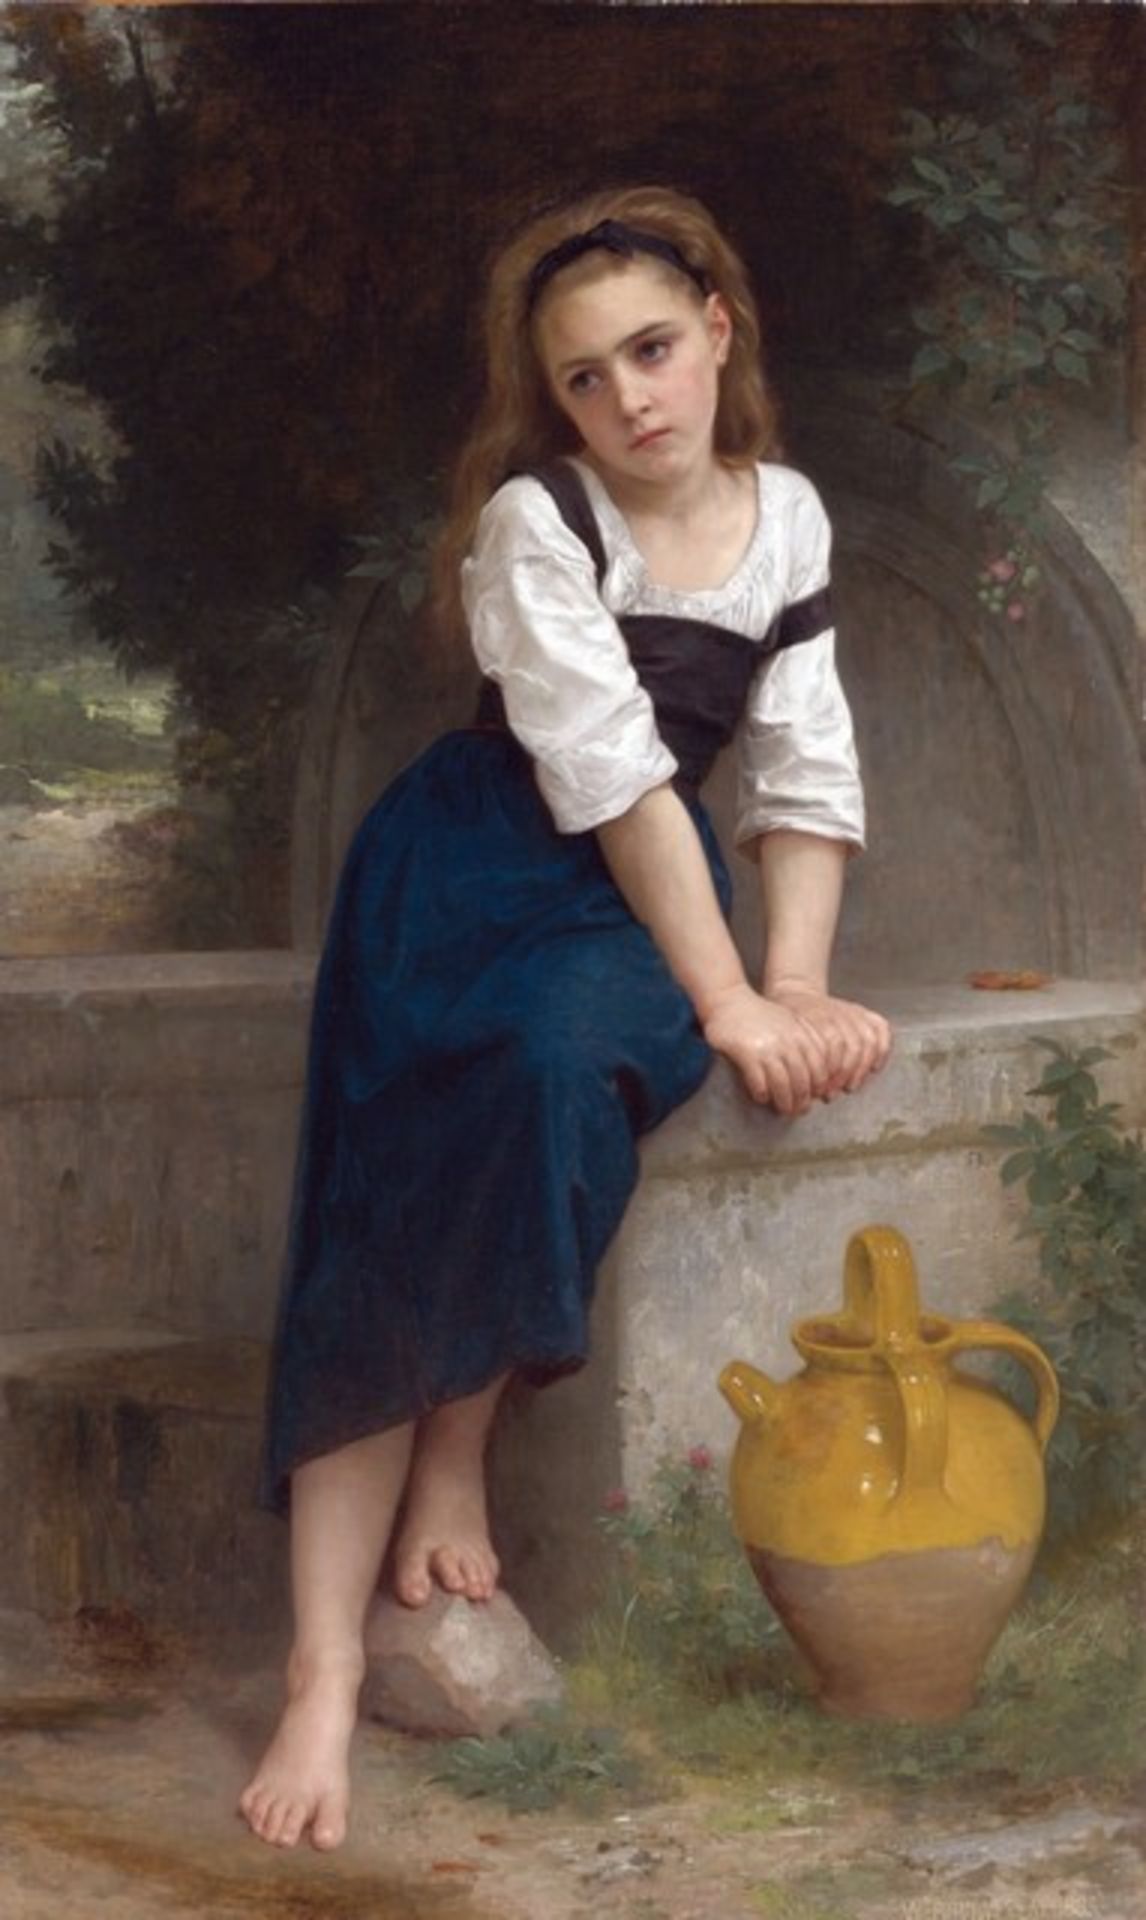 William Bouguereau - Orphan by the Fountain (1883)